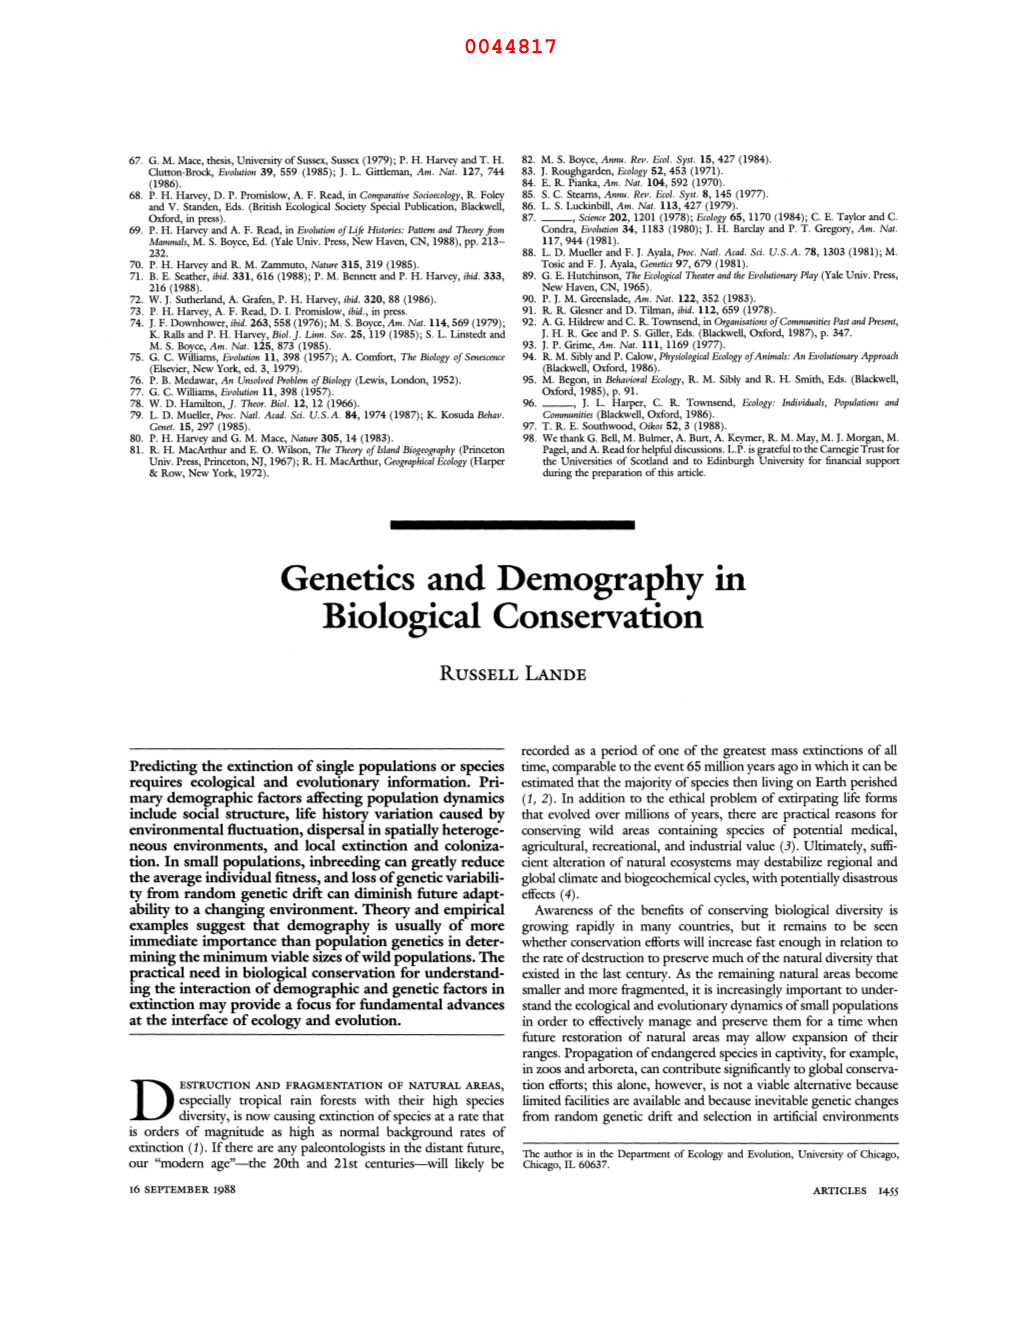 Genetics and Demography in Biological Conservation